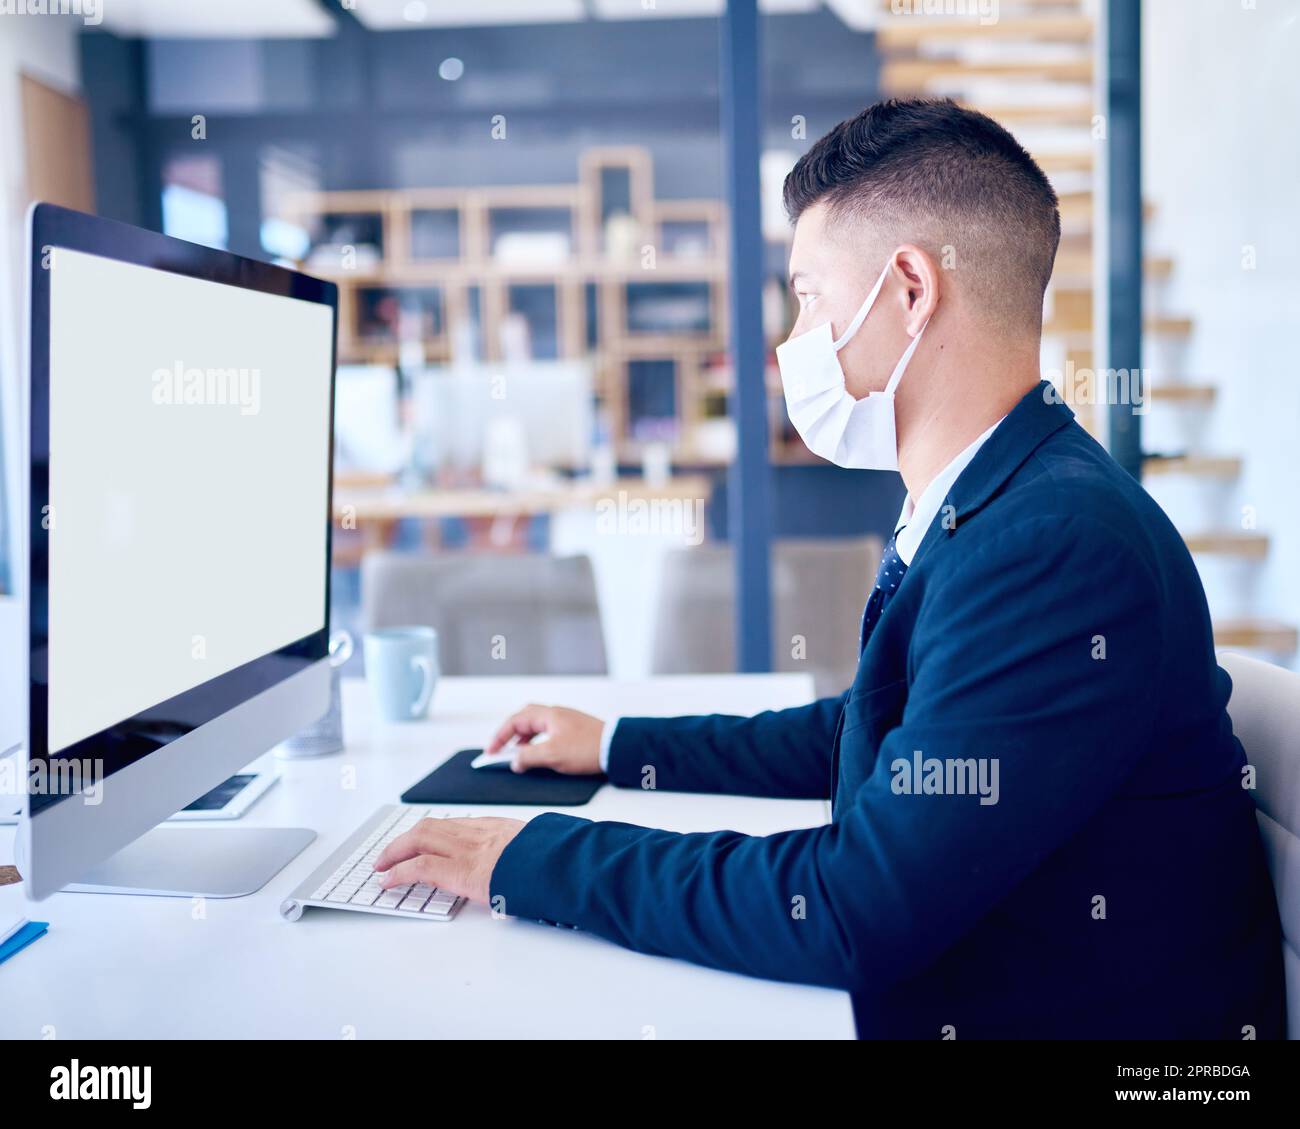 Keep it clean, some dangers go unseen. a young businessman wearing a face mask and using a computer in a modern office. Stock Photo